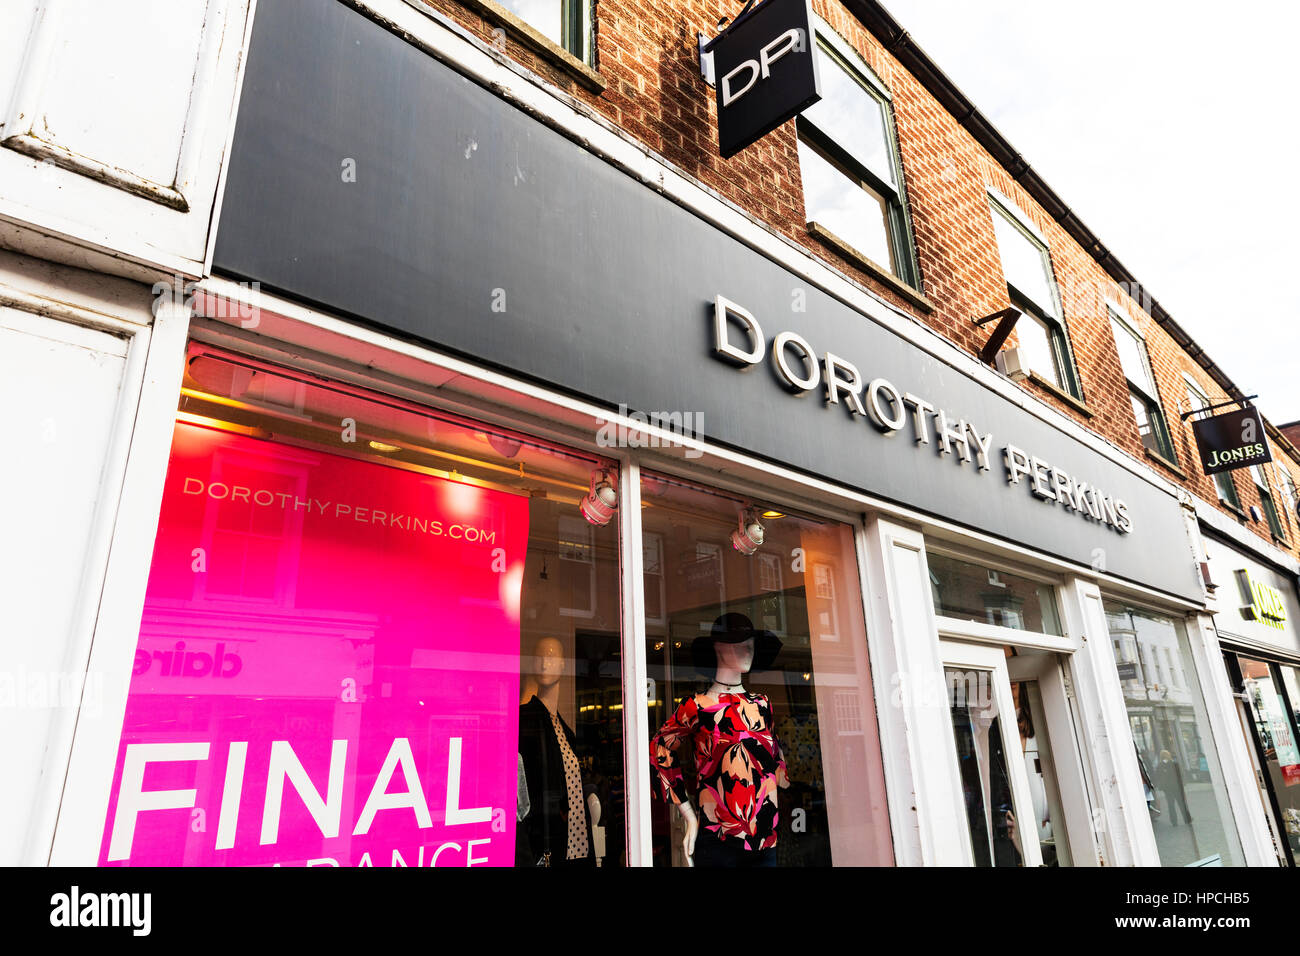 Dorothy Perkins ladies clothes store ladies wear shop UK England sign signs outside shop front exterior models in window Stock Photo